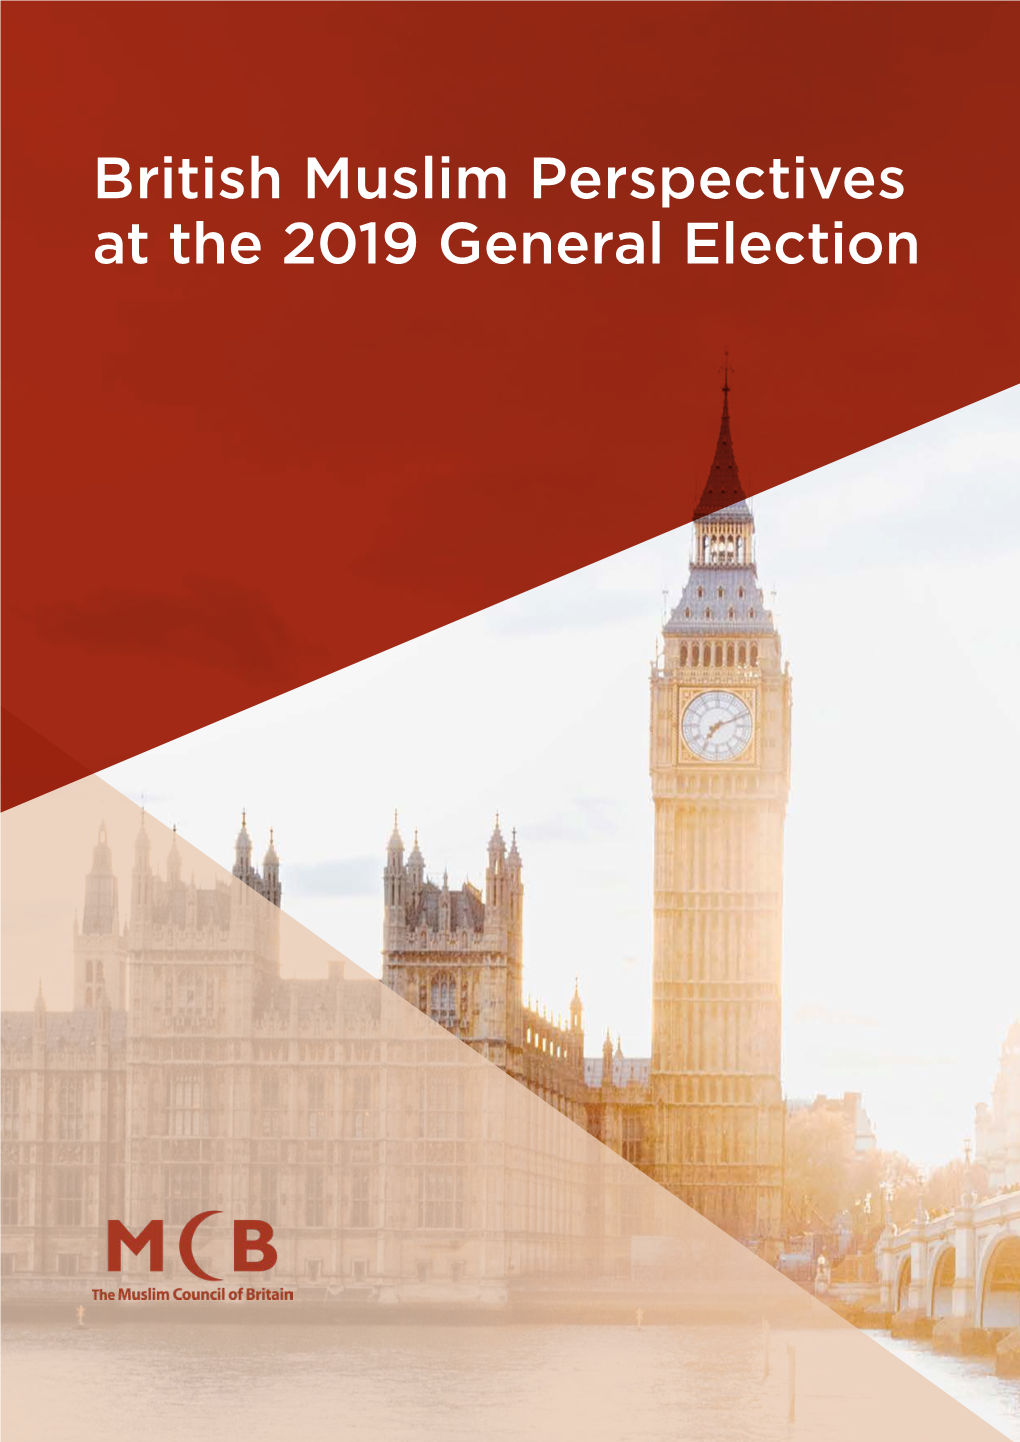 British Muslim Perspectives at the 2019 General Election Contents